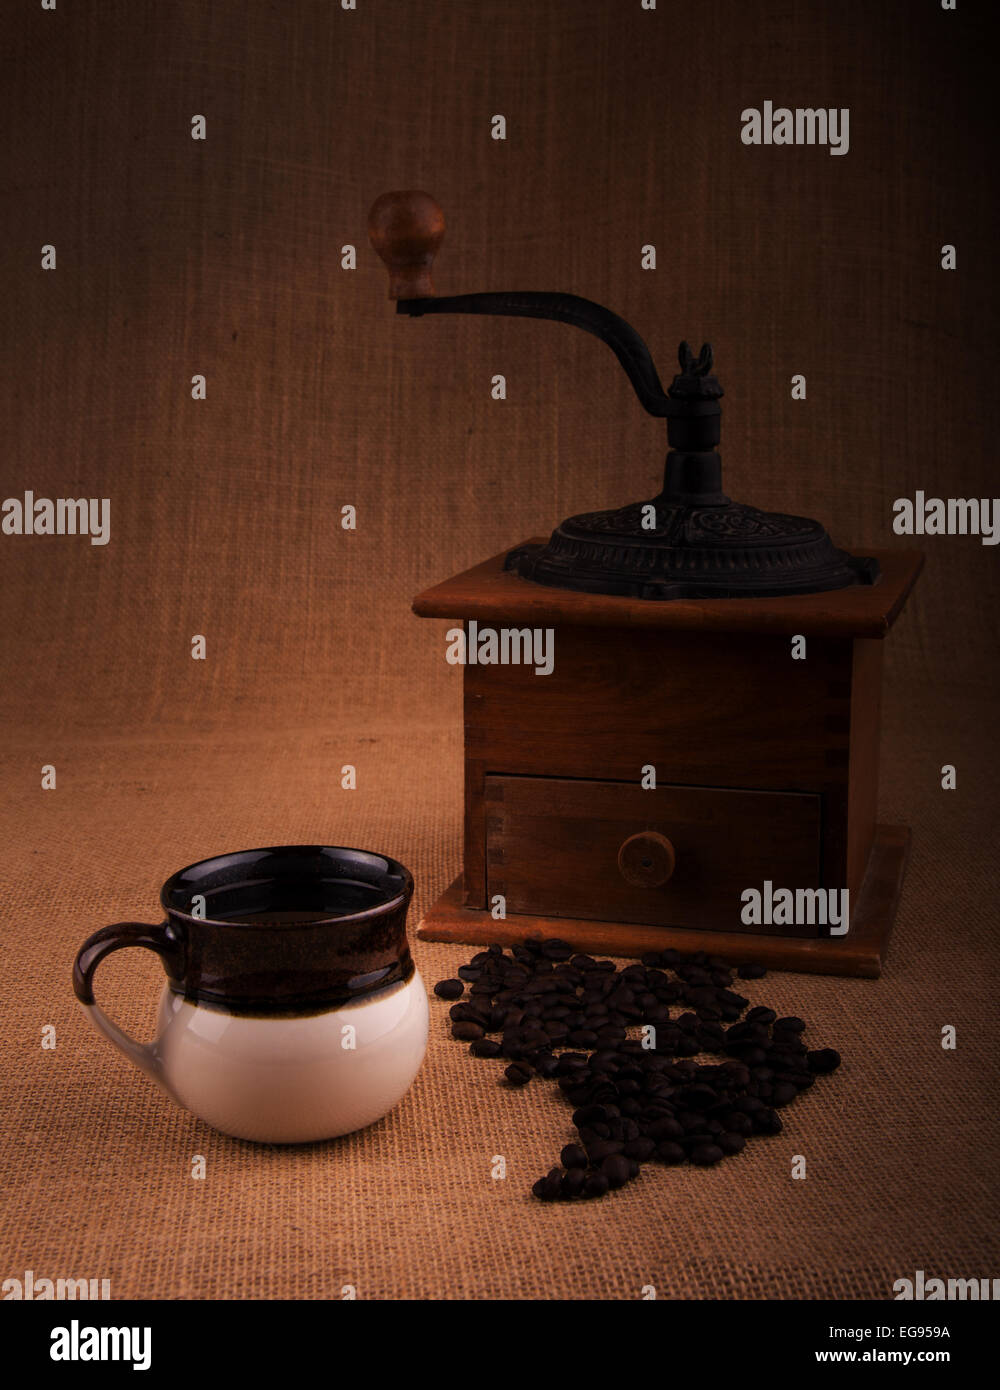 Cup of coffee with beans and an old grinder on the background, a warm toned image with vignette Stock Photo